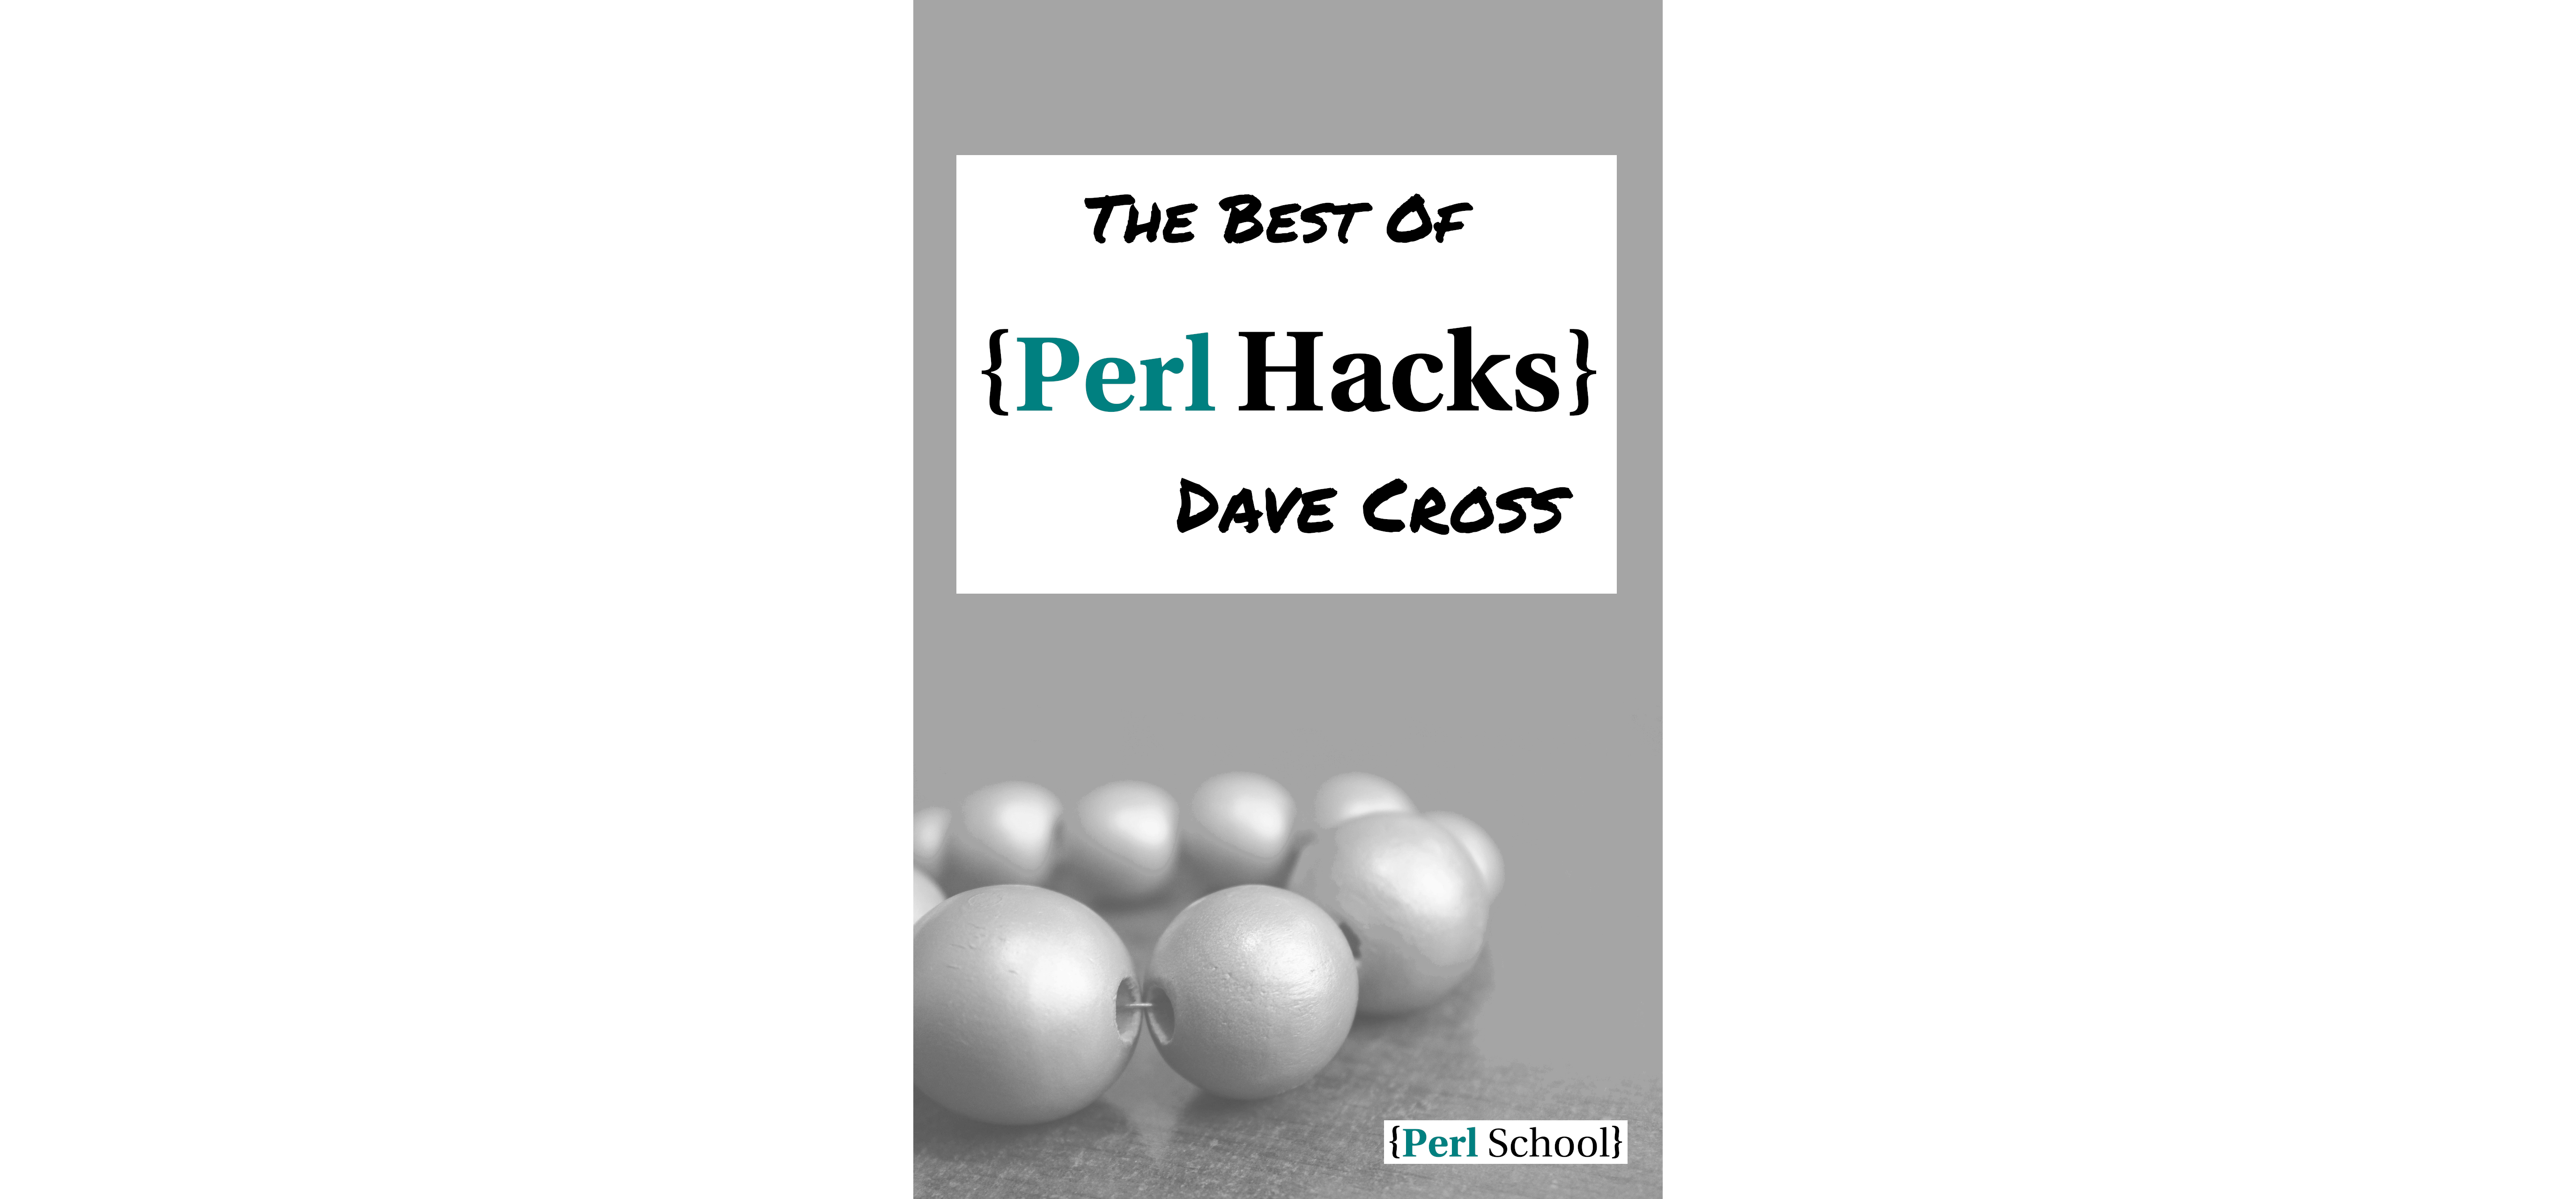 The Best of Perl Hacks